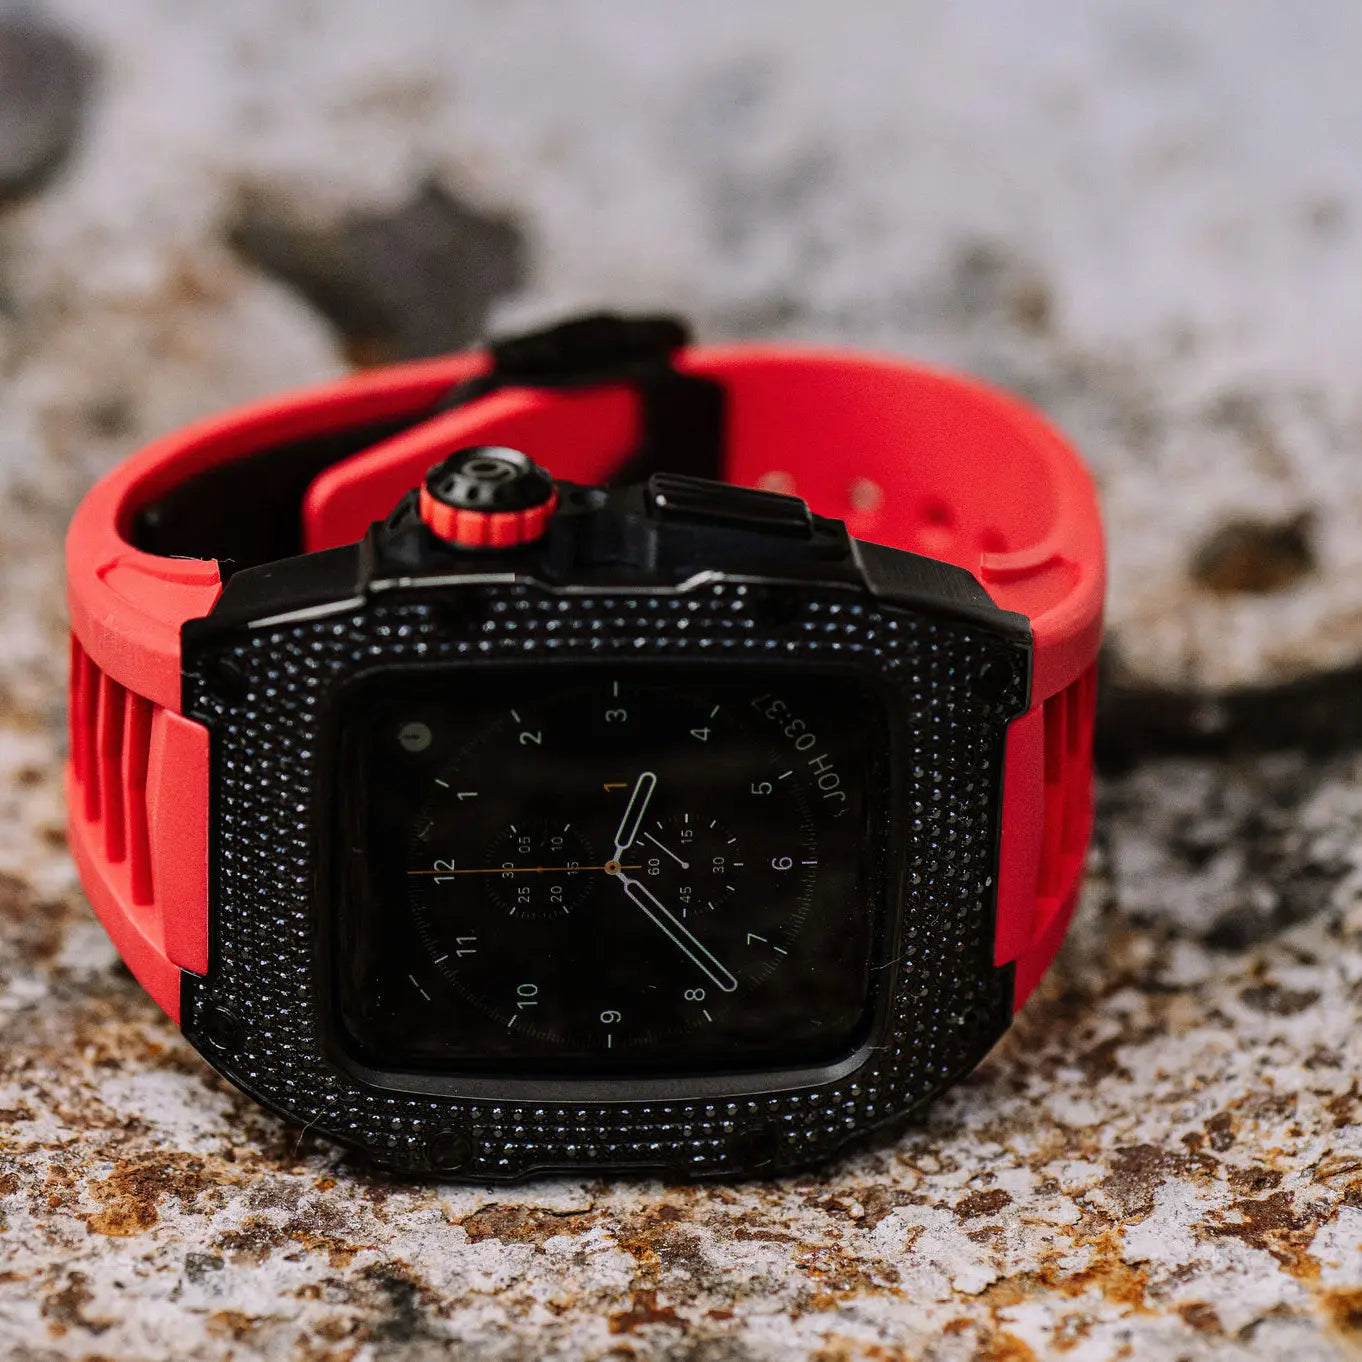 Give Your Apple Watch a Fresh Look with Our Apple Watch Straps and Covers